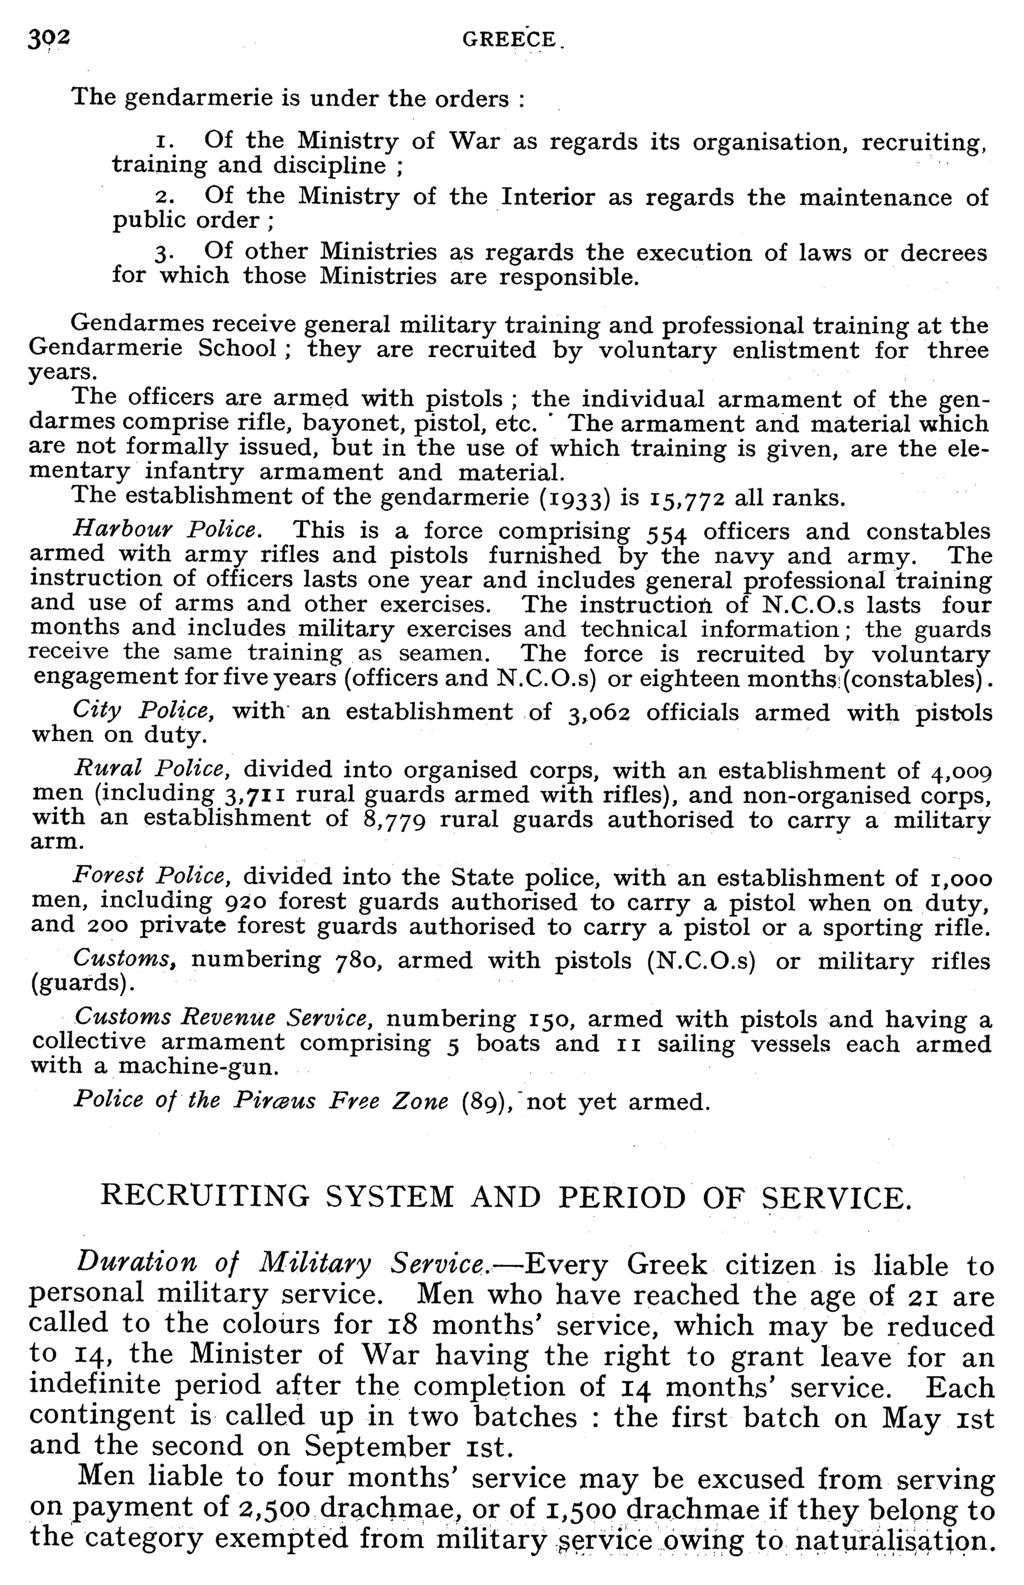 392 GREECE. The gendarmerie is under the orders : I. Of the Ministry of War as regards its organisation, recruiting, training and discipline; 2.